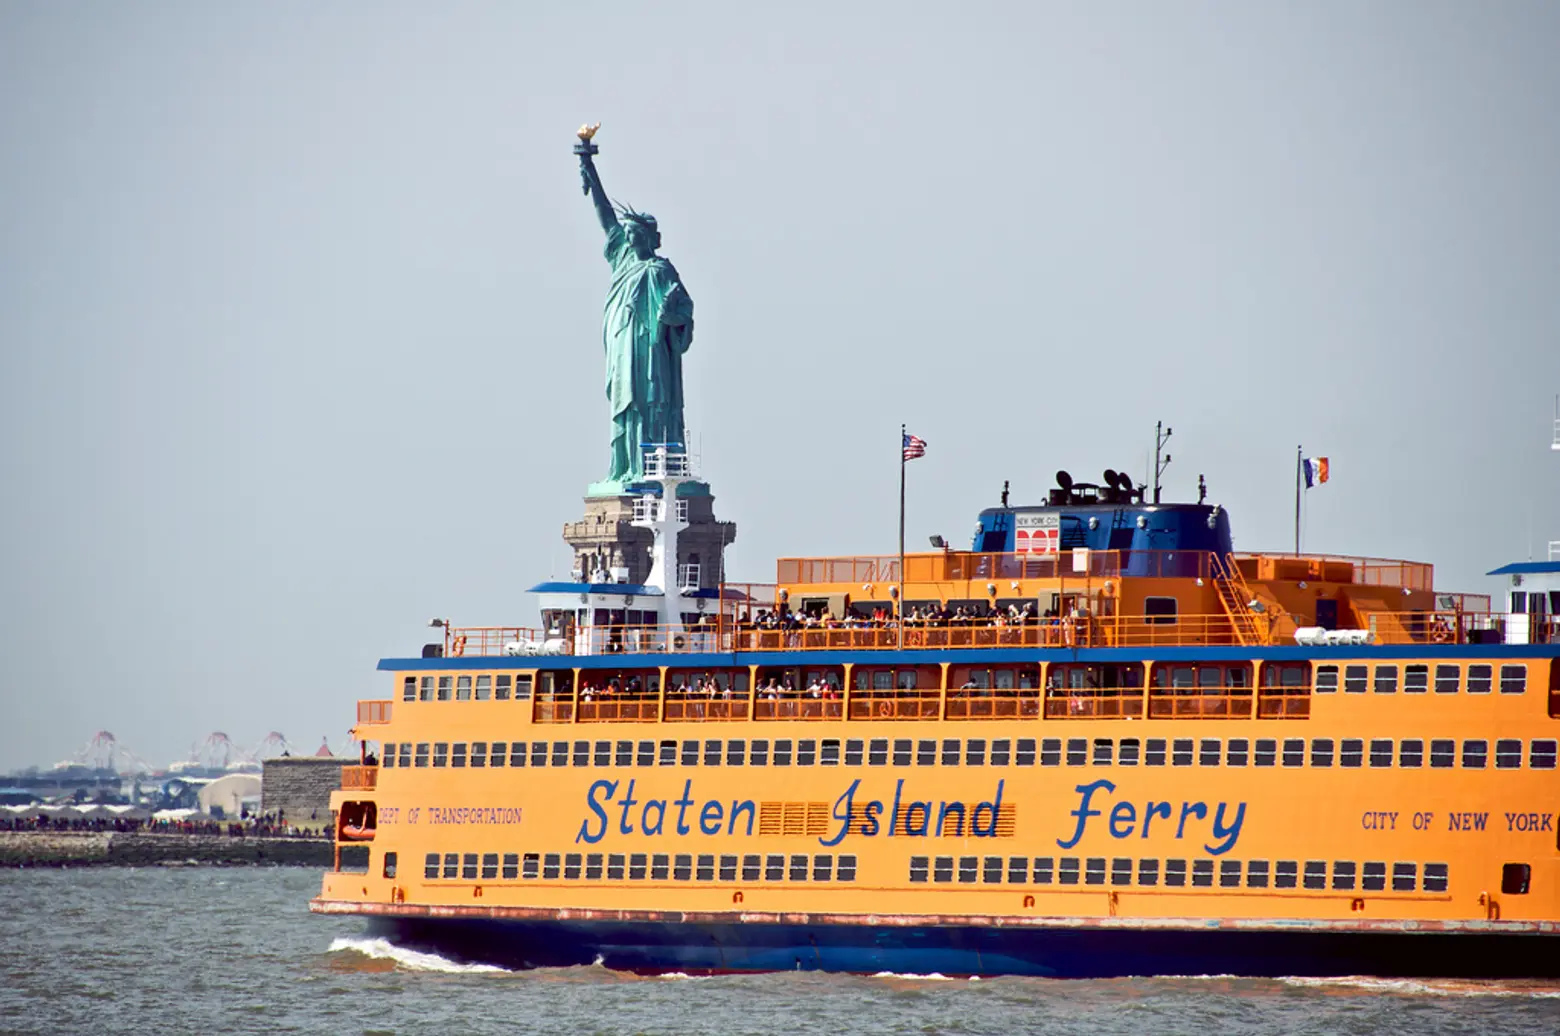 Full, 24-hour Staten Island Ferry service resumes today